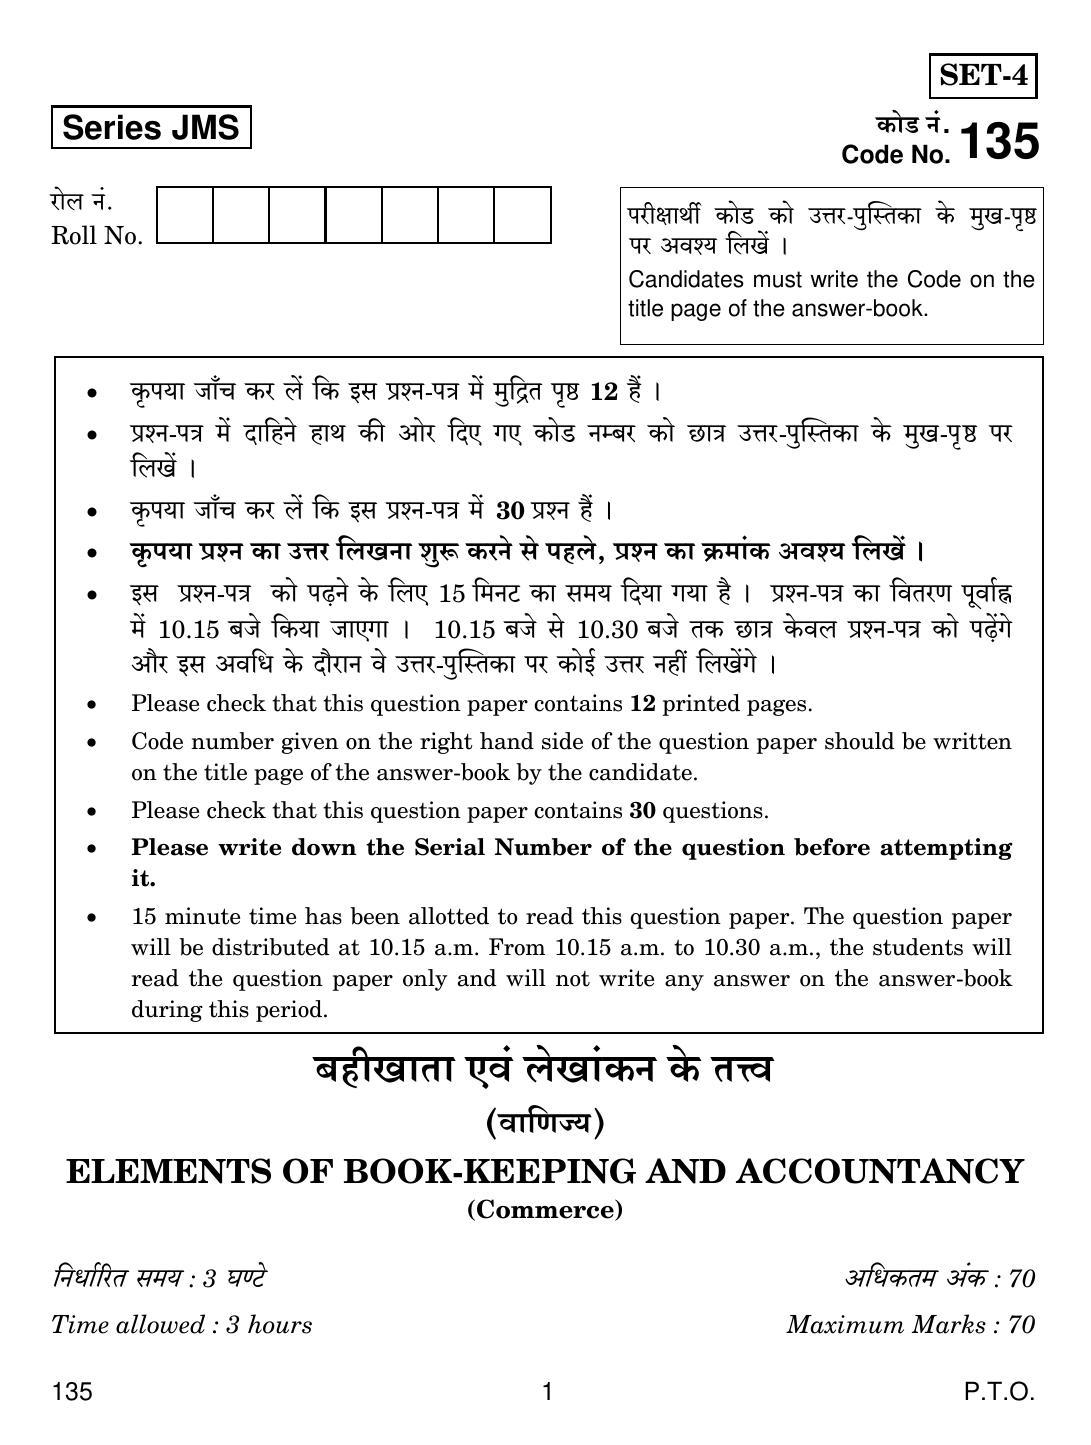 CBSE Class 10 135 ELEMENTS OF BOOK-KEEPING AND ACCOUNTANCY (COMMERCE) 2019 Question Paper - Page 1